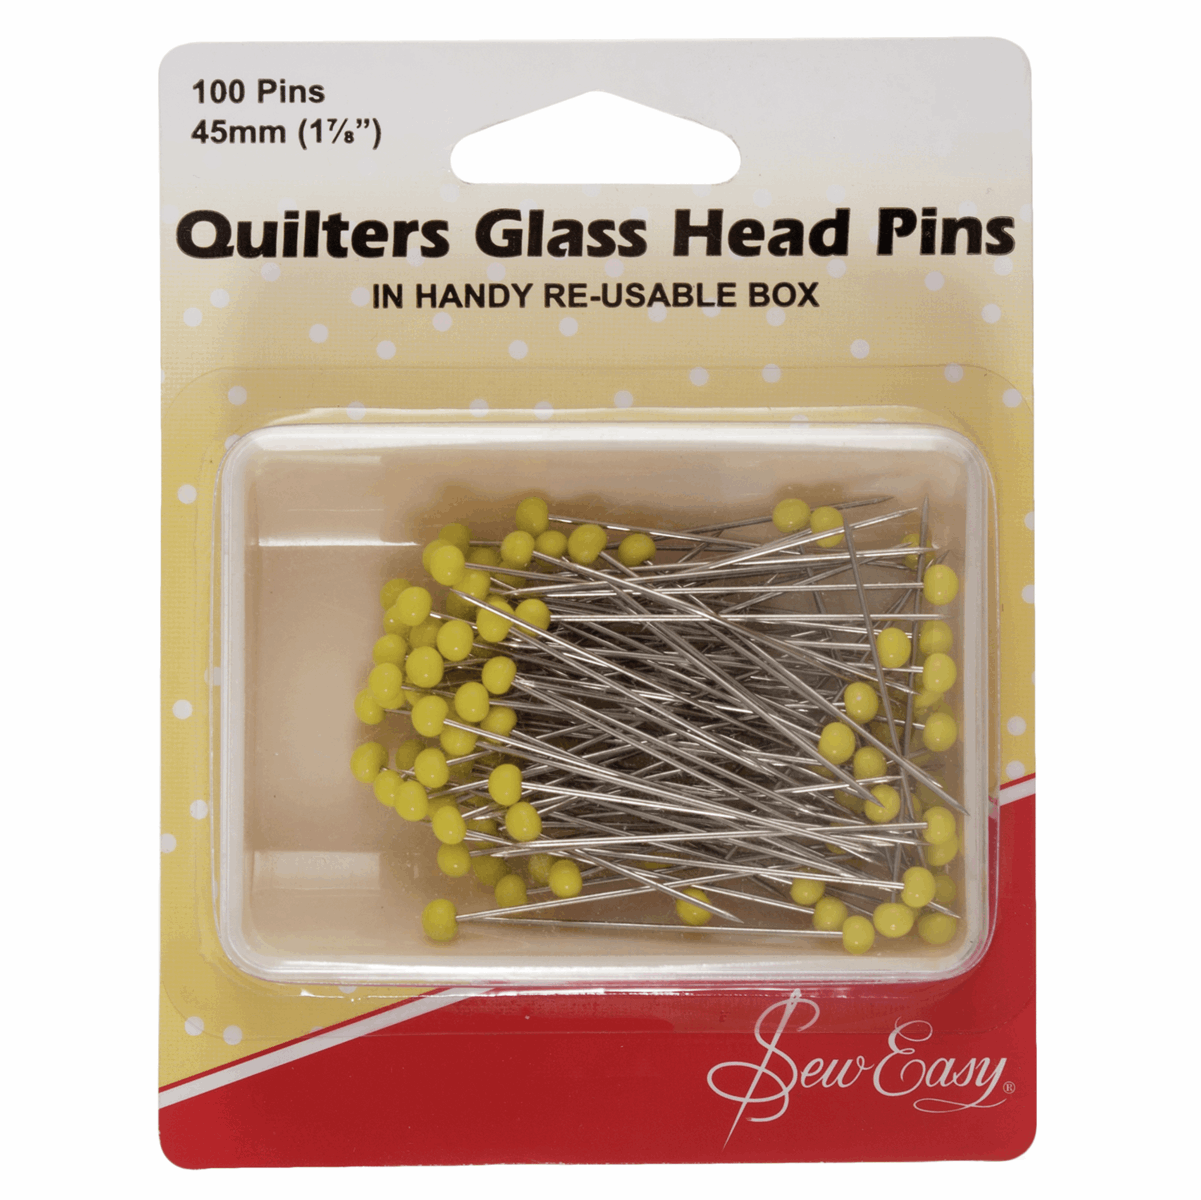 Glass headed quilters pins